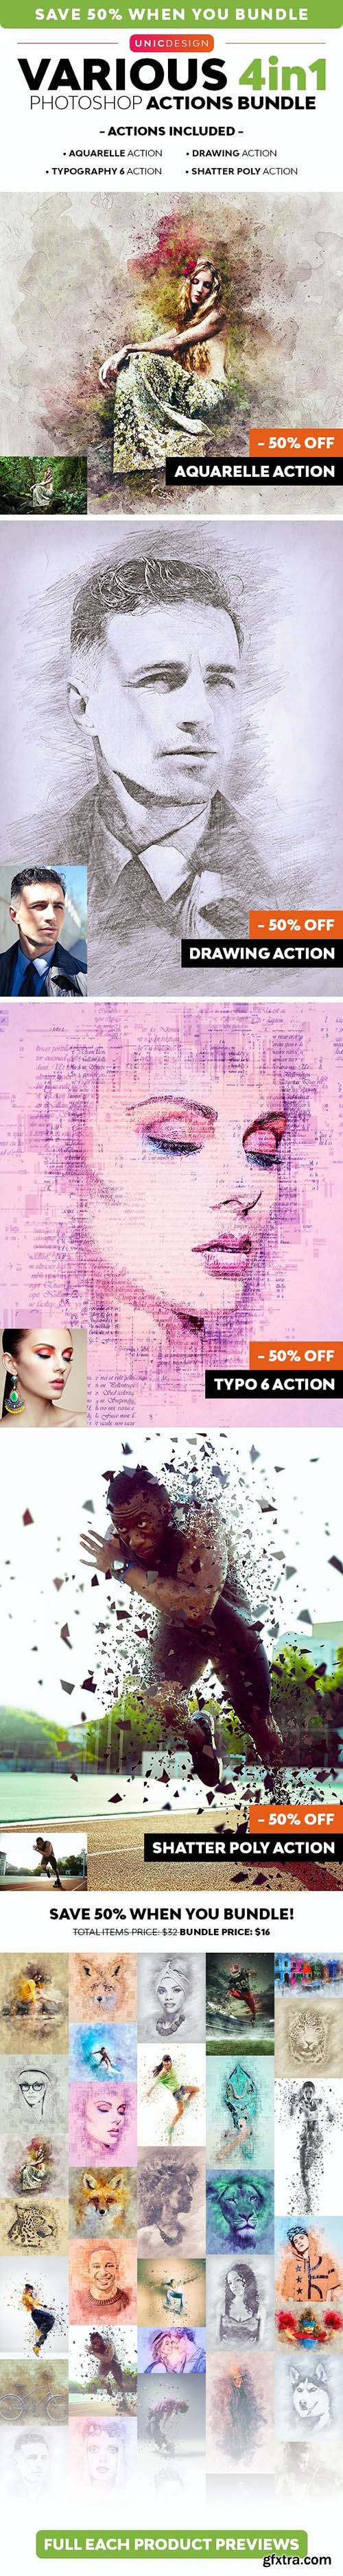 GraphicRiver - Various 4in1 Photoshop Actions Bundle 26390058